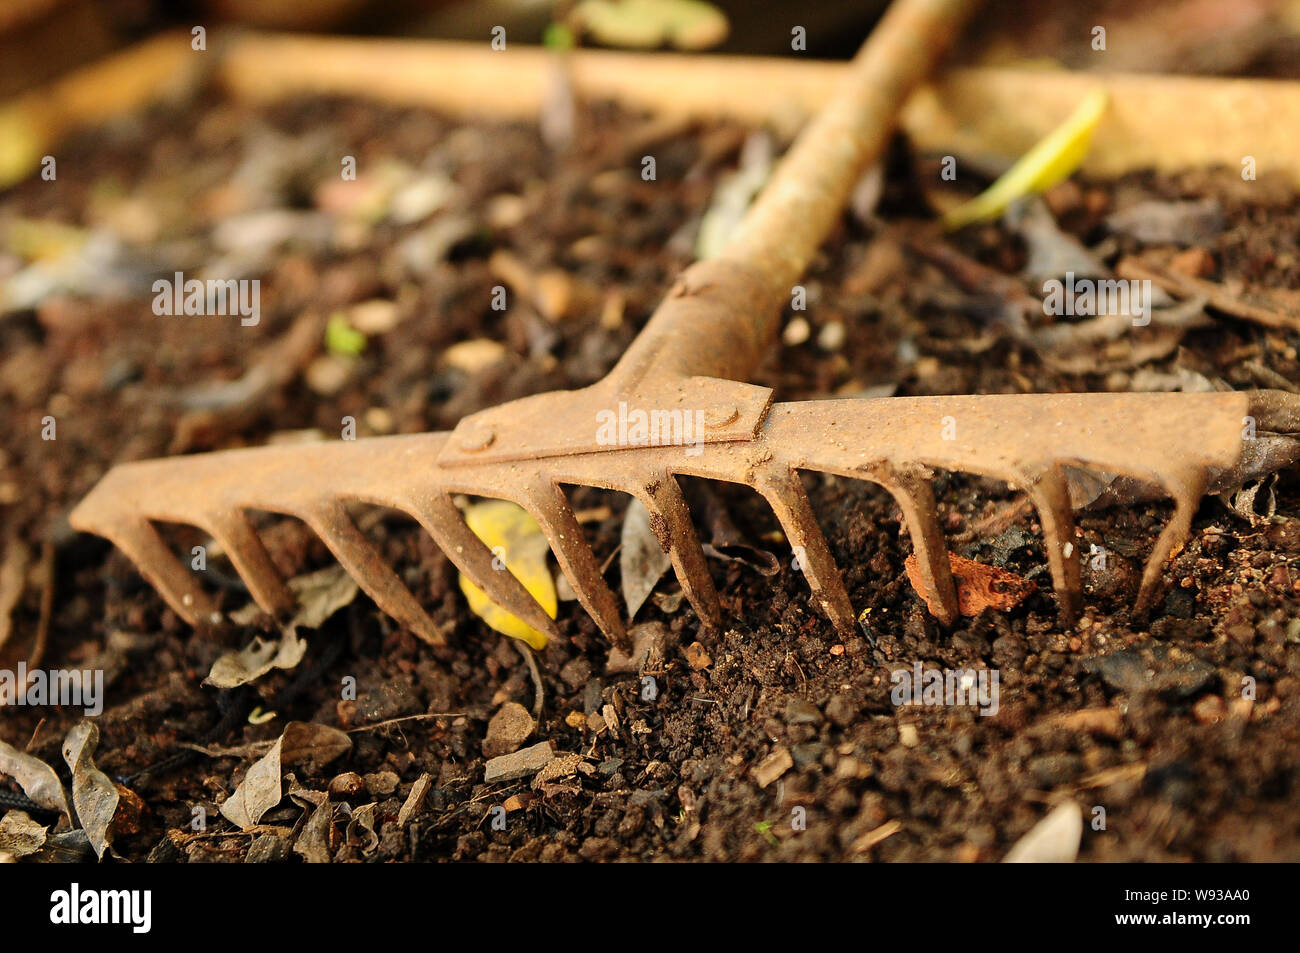 plowing land cultivation, planting, nature Stock Photo